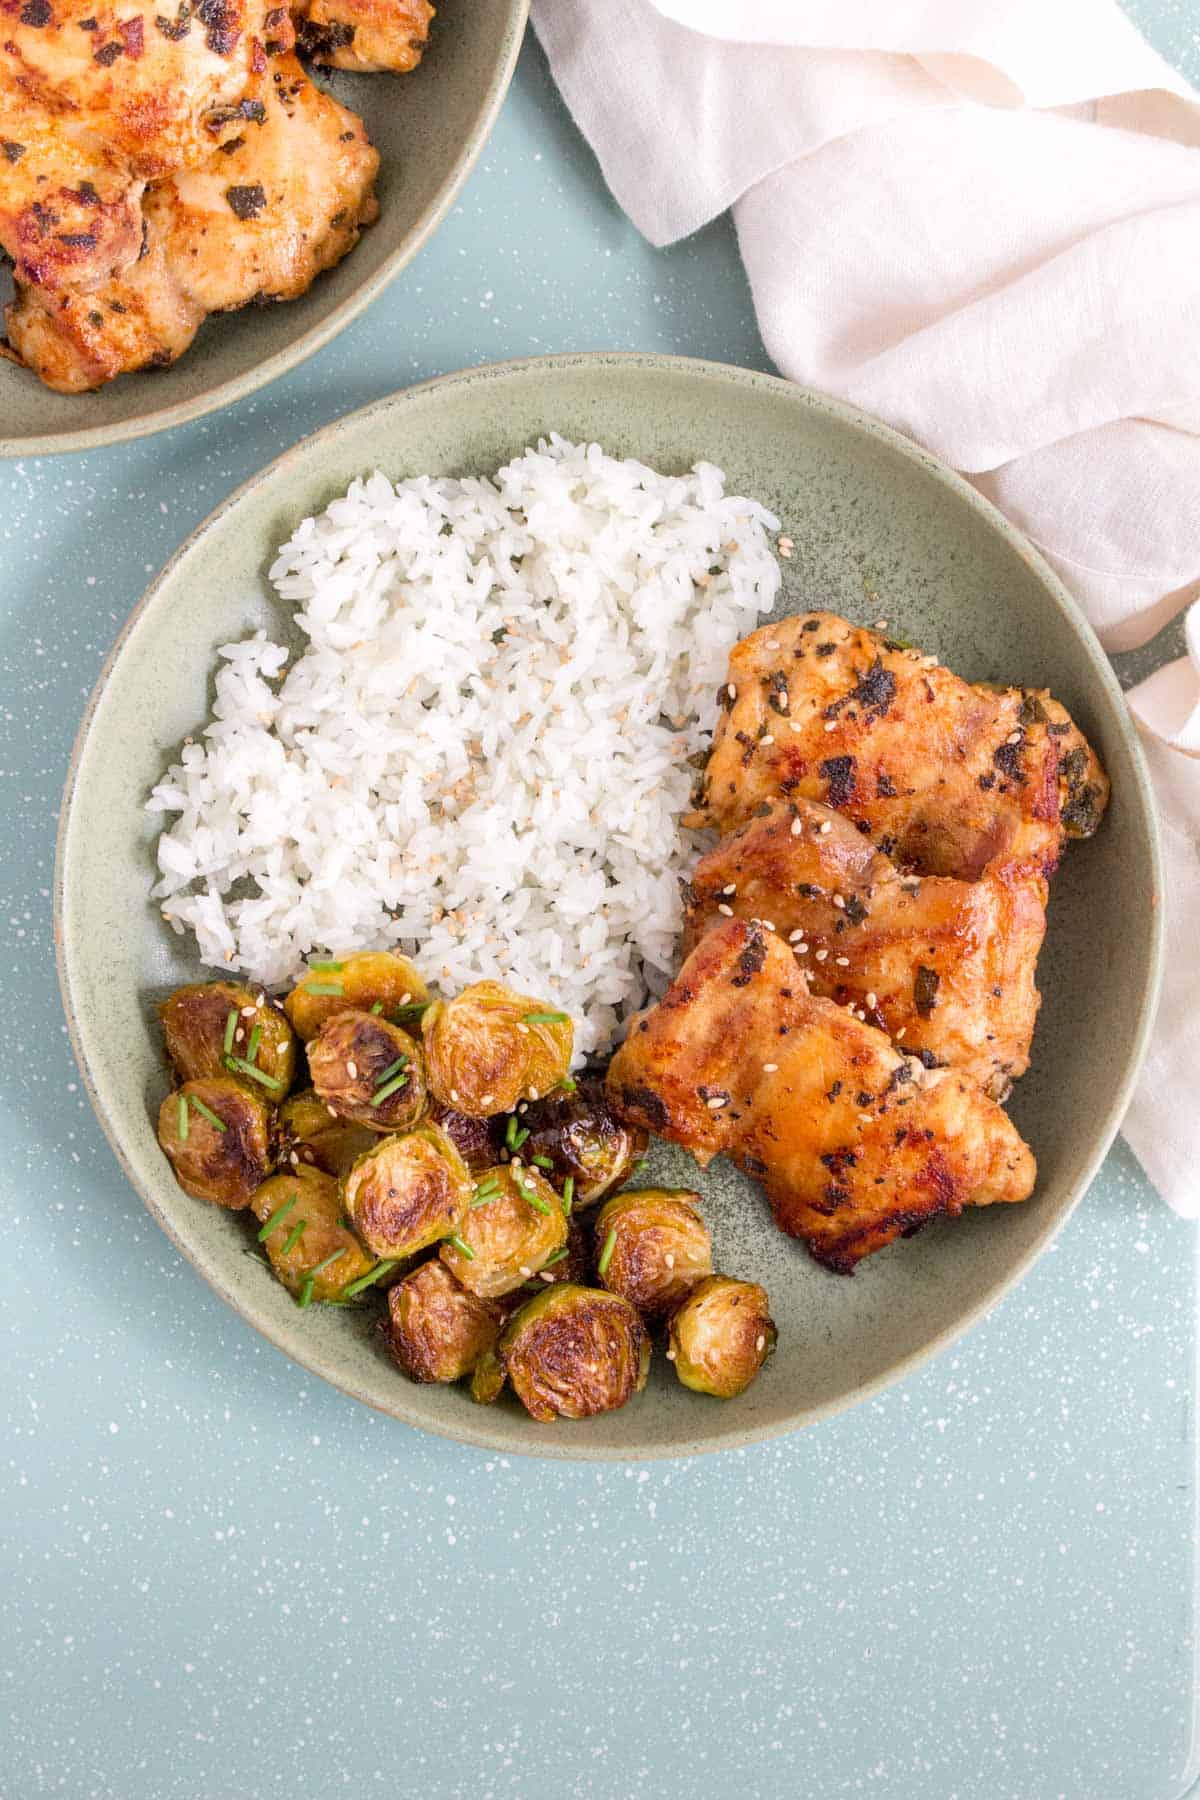 Three sage chicken thighs with rice and brussels sprouts in a green plate.